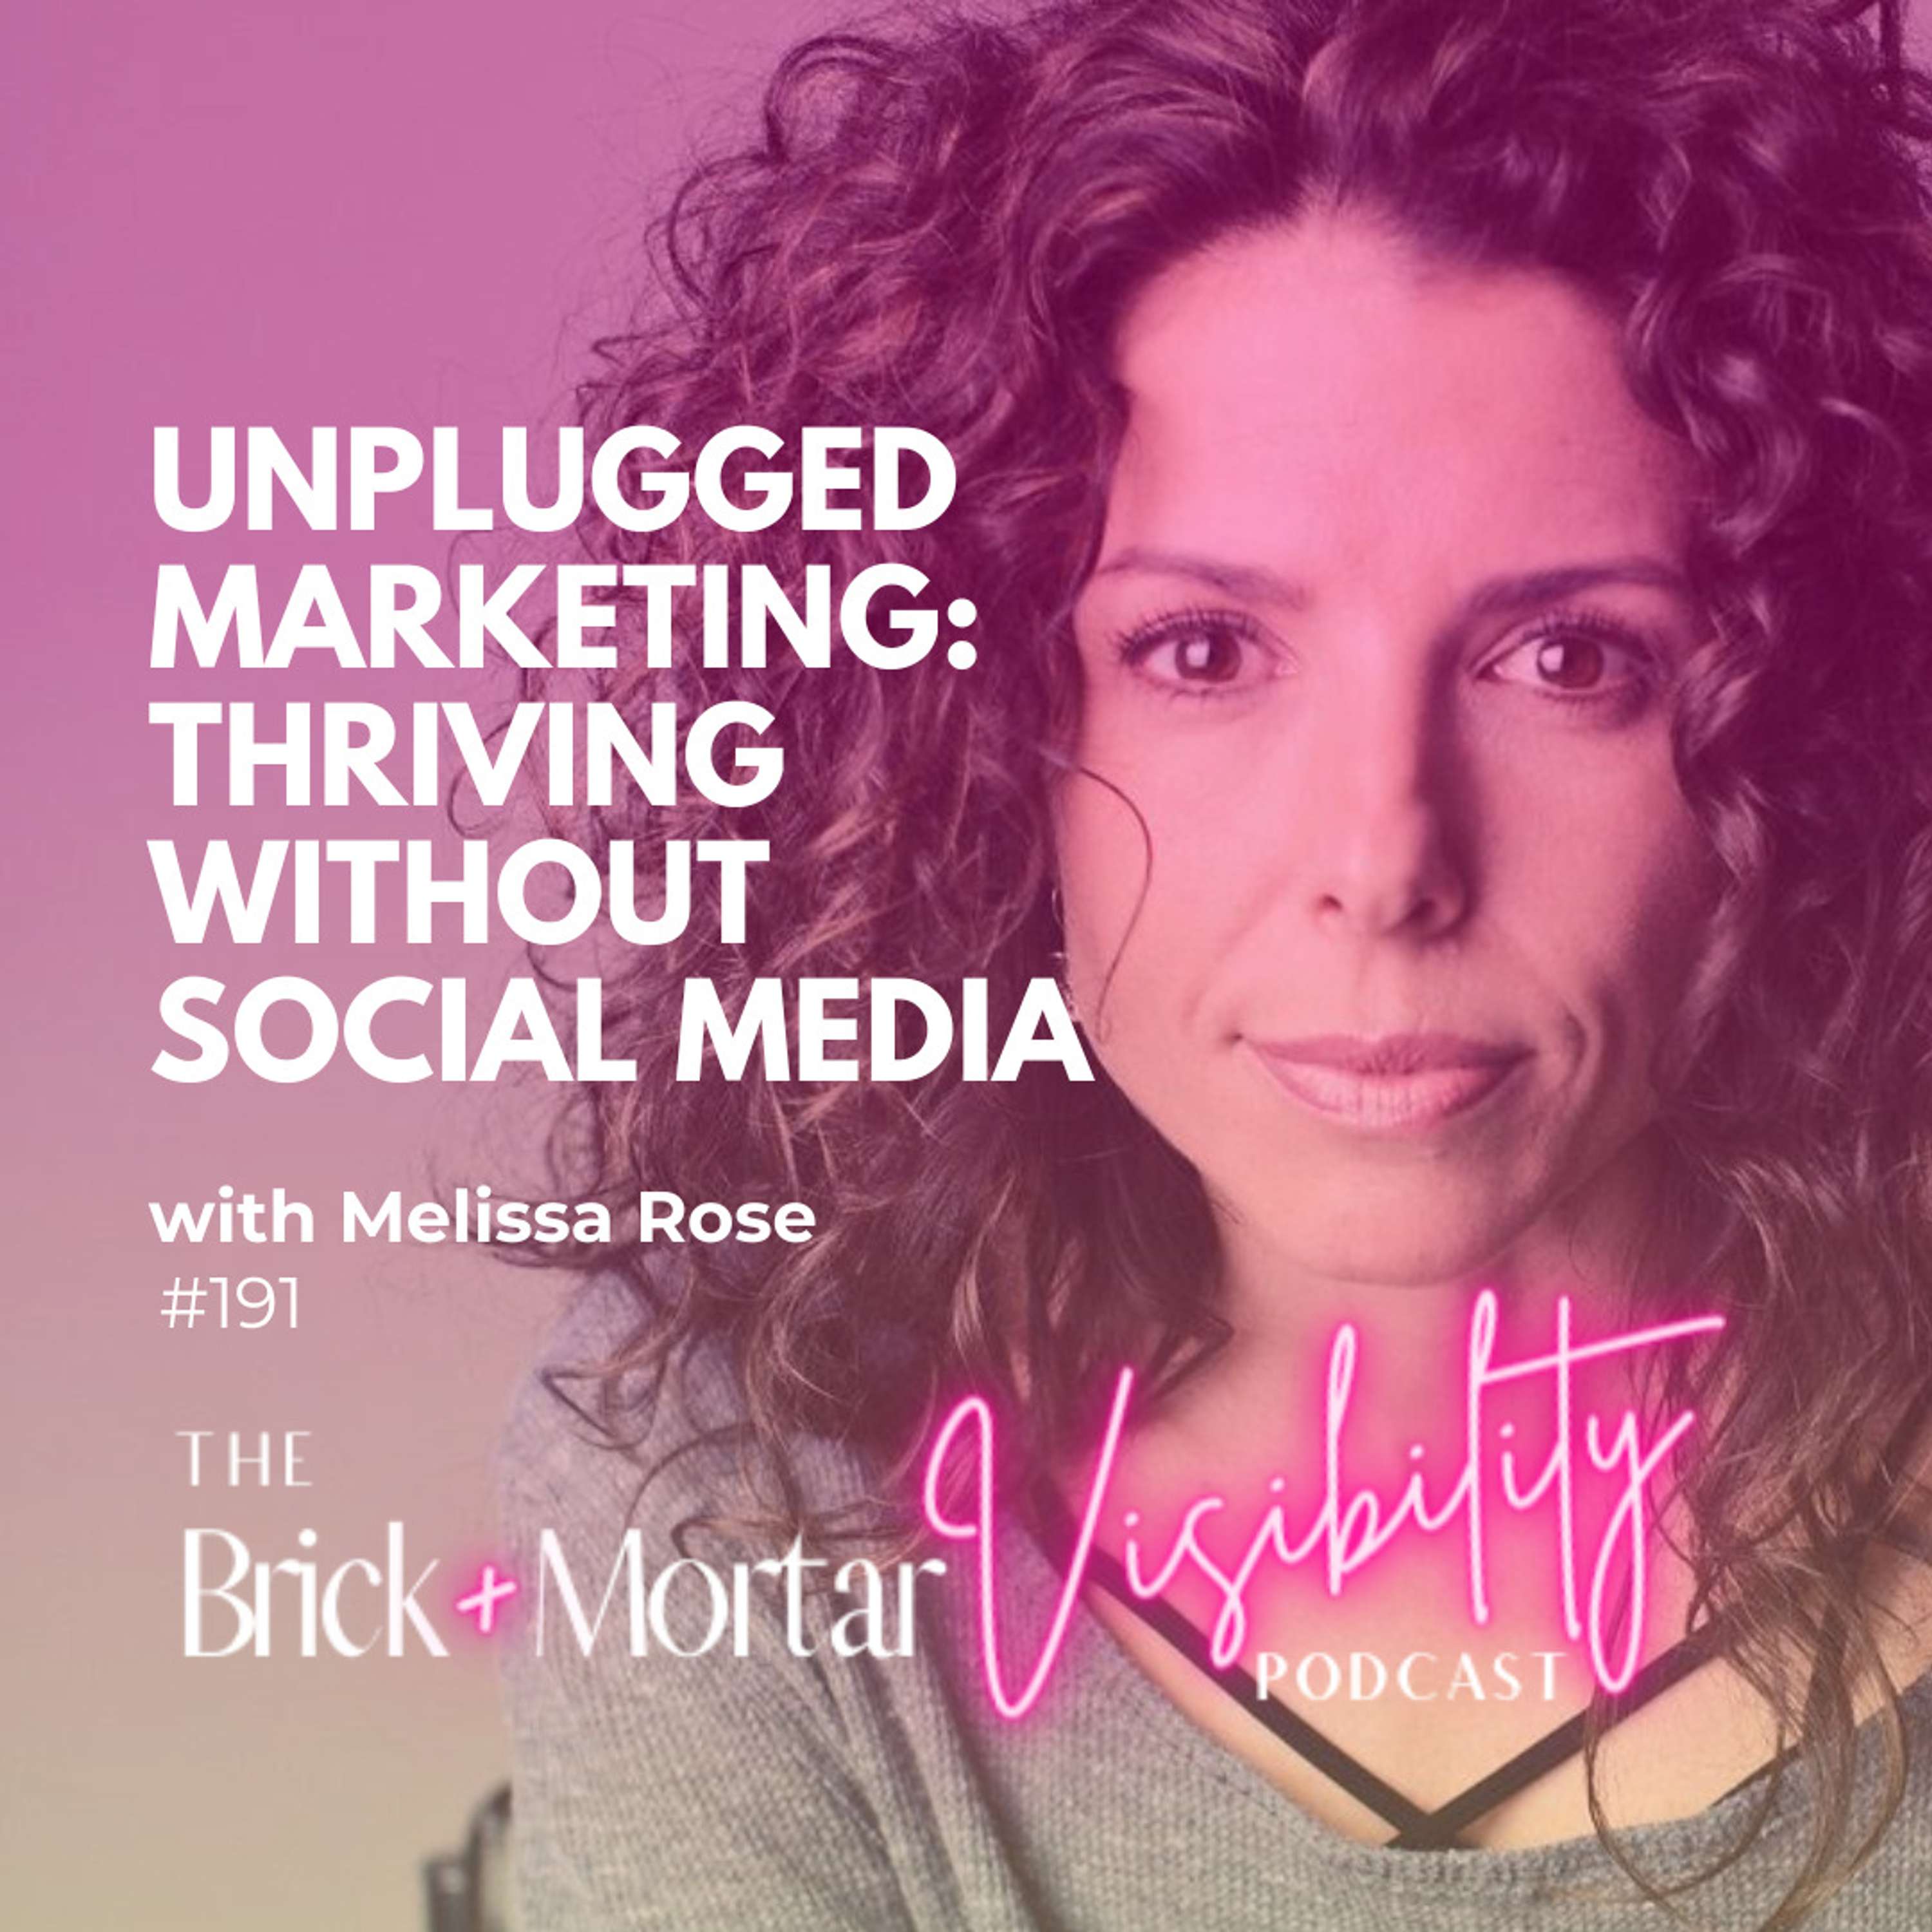 Unplugged Marketing: Thriving Without Social Media